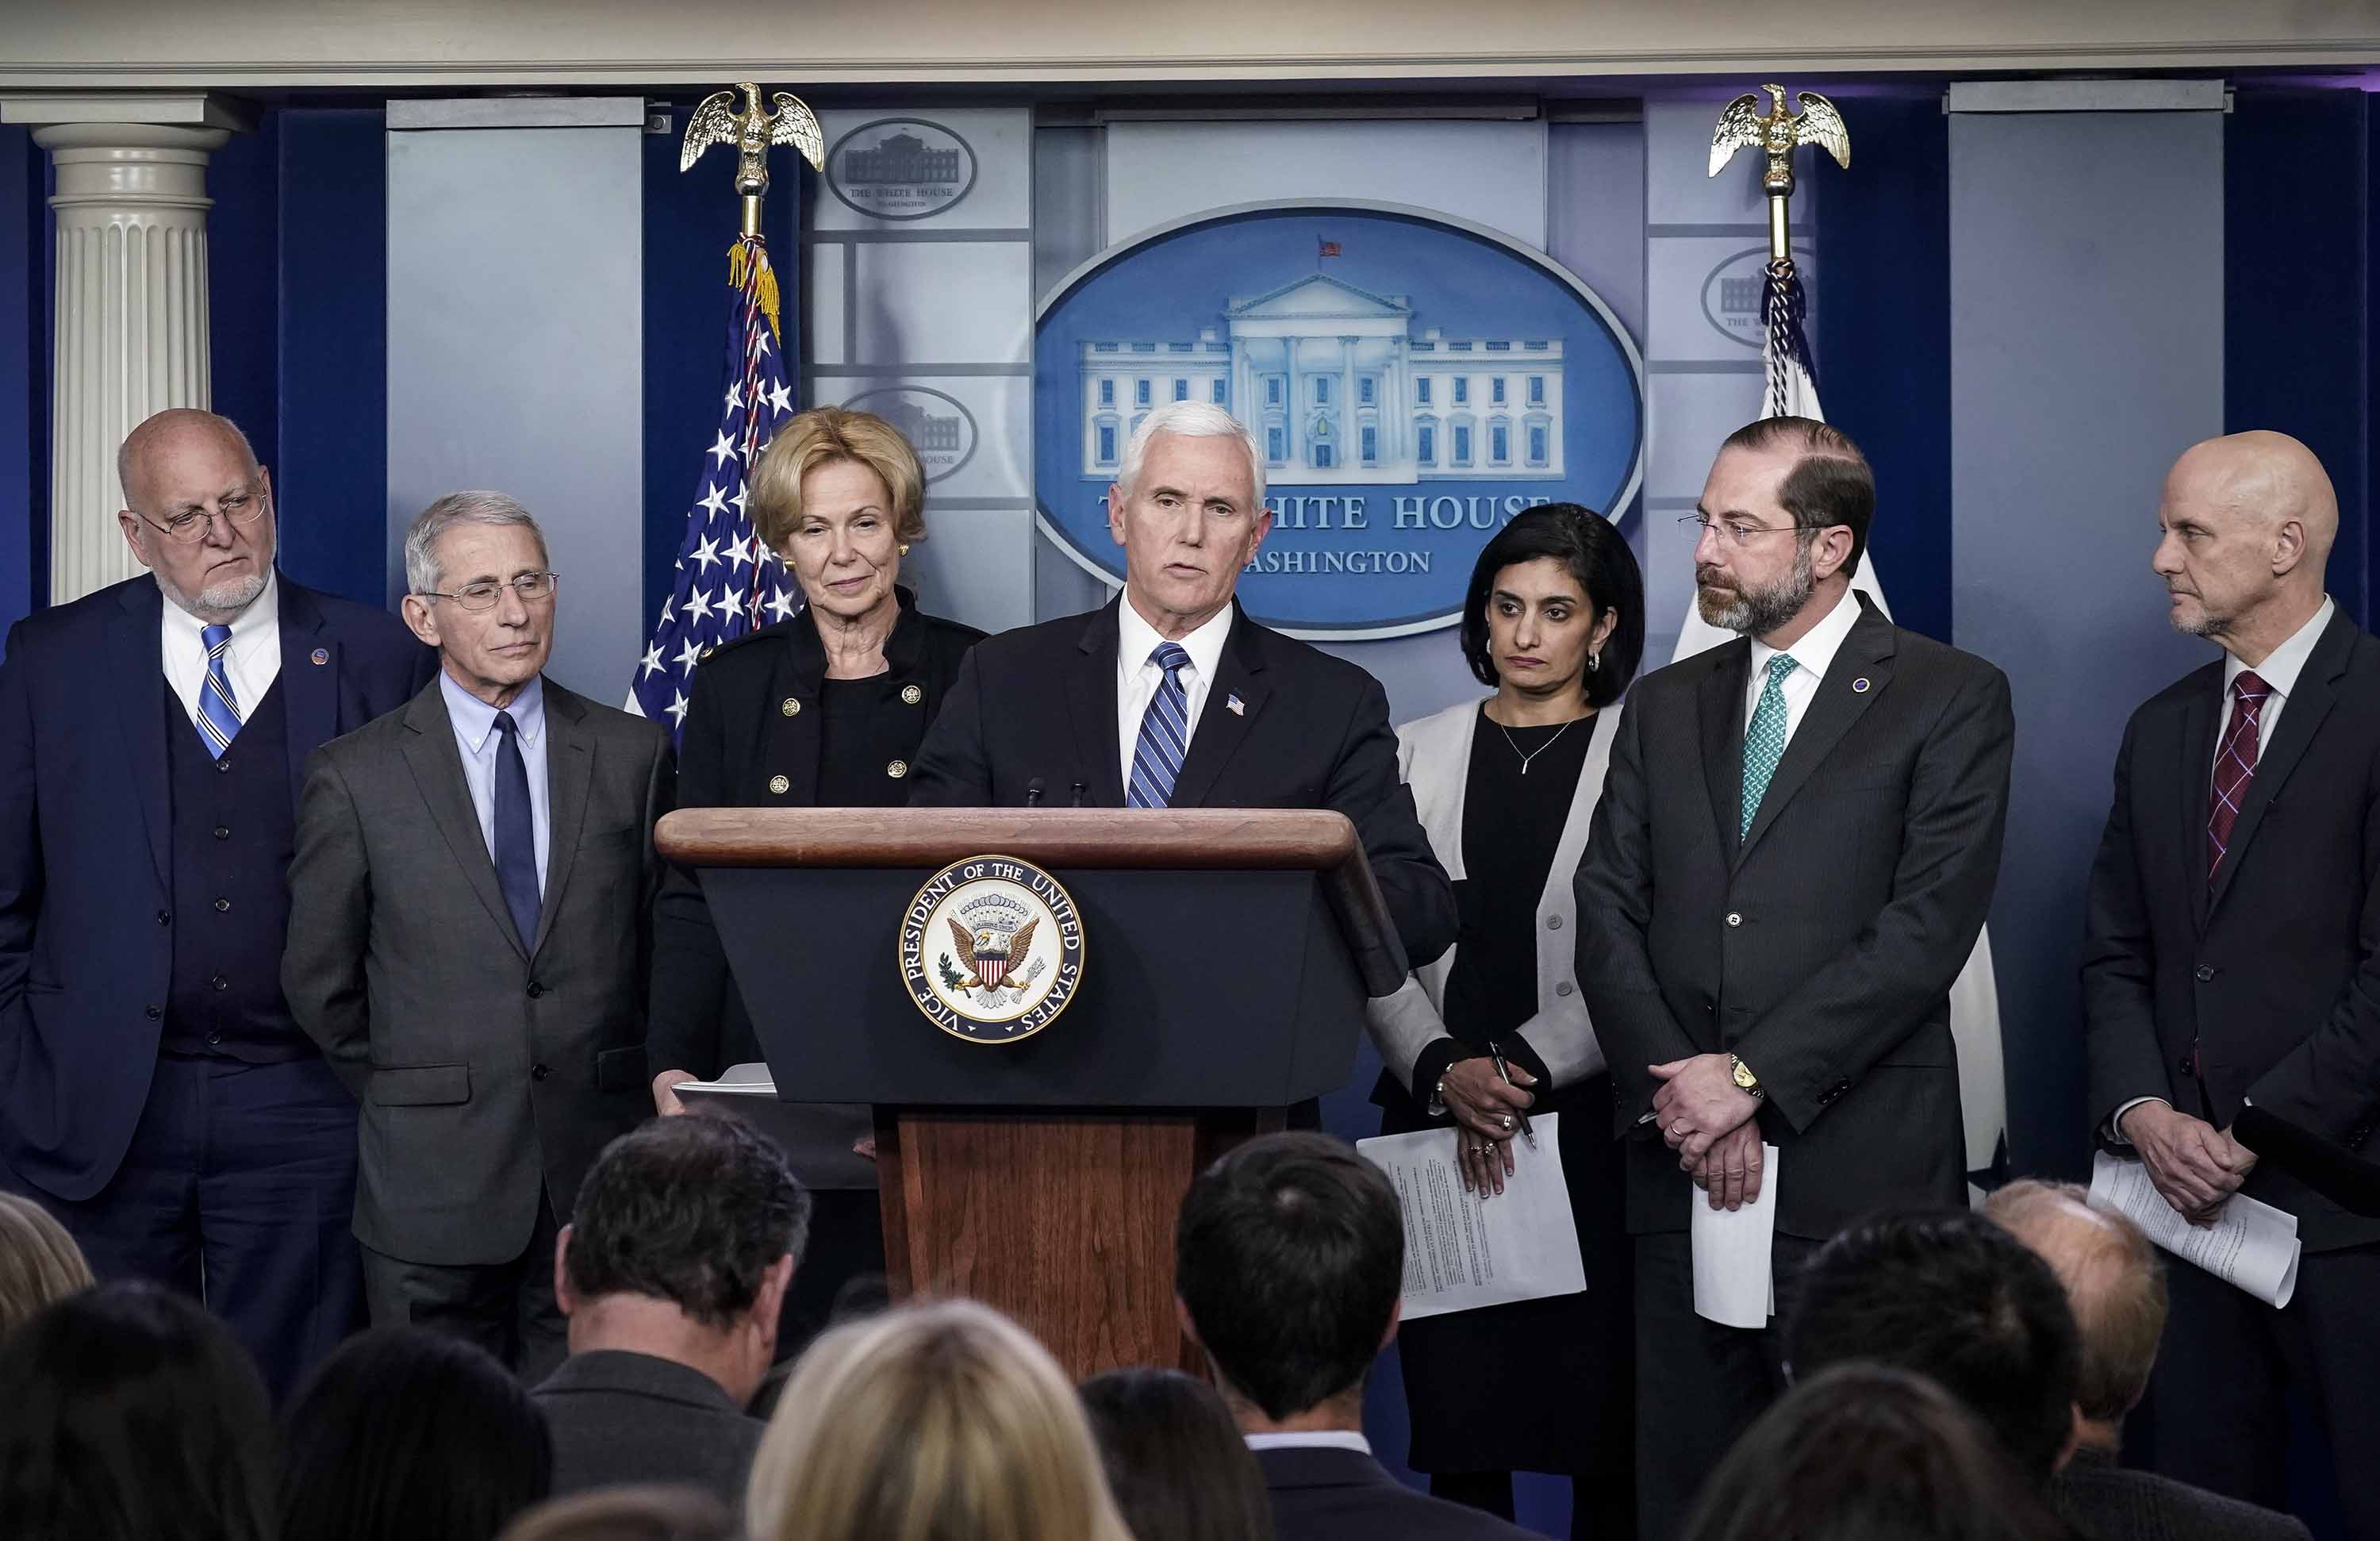 Vice President Mike Pence speaks during a briefing on the administration's coronavirus response at the White House on March 2. Standing with Pence, from left: Dr. Robert Redfield, Director of the US Centers for Disease Control and Prevention; Dr. Anthony Fauci, Director of the National Institute of Allergy and Infectious Diseases; Dr. Deborah Birx, White House Coronavirus Response Coordinator; Seema Verma, administrator of the Centers for Medicare and Medicaid Services; Alex Azar, Secretary of Health and Human Services; and Stephen Hahn, commissioner of food and drugs at the US Food and Drug Administration.